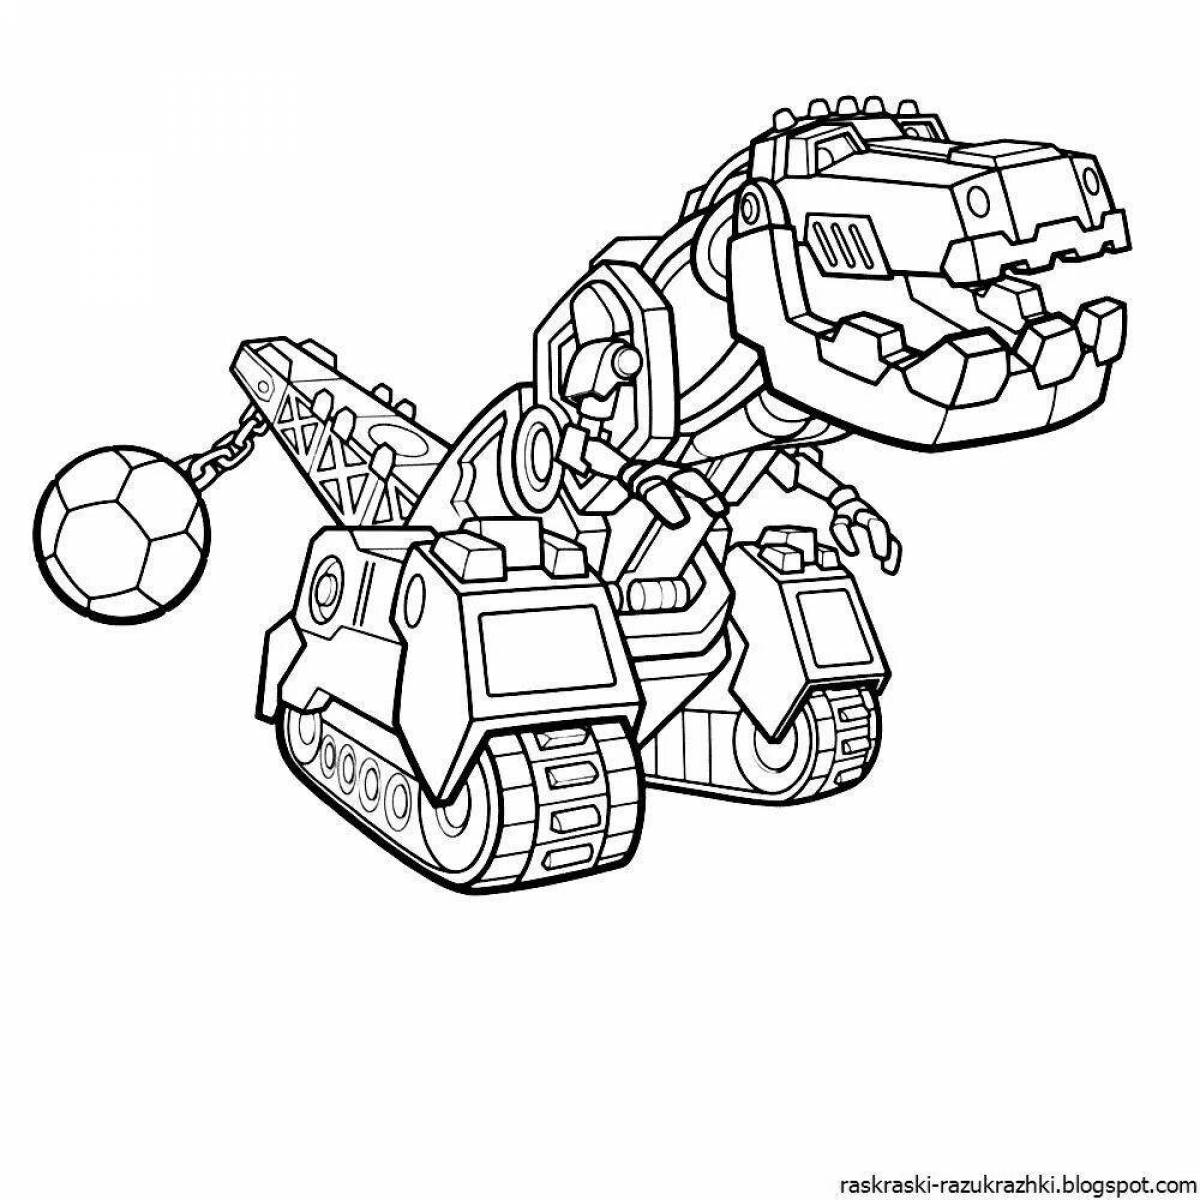 Colorful screamers coloring pages for boys